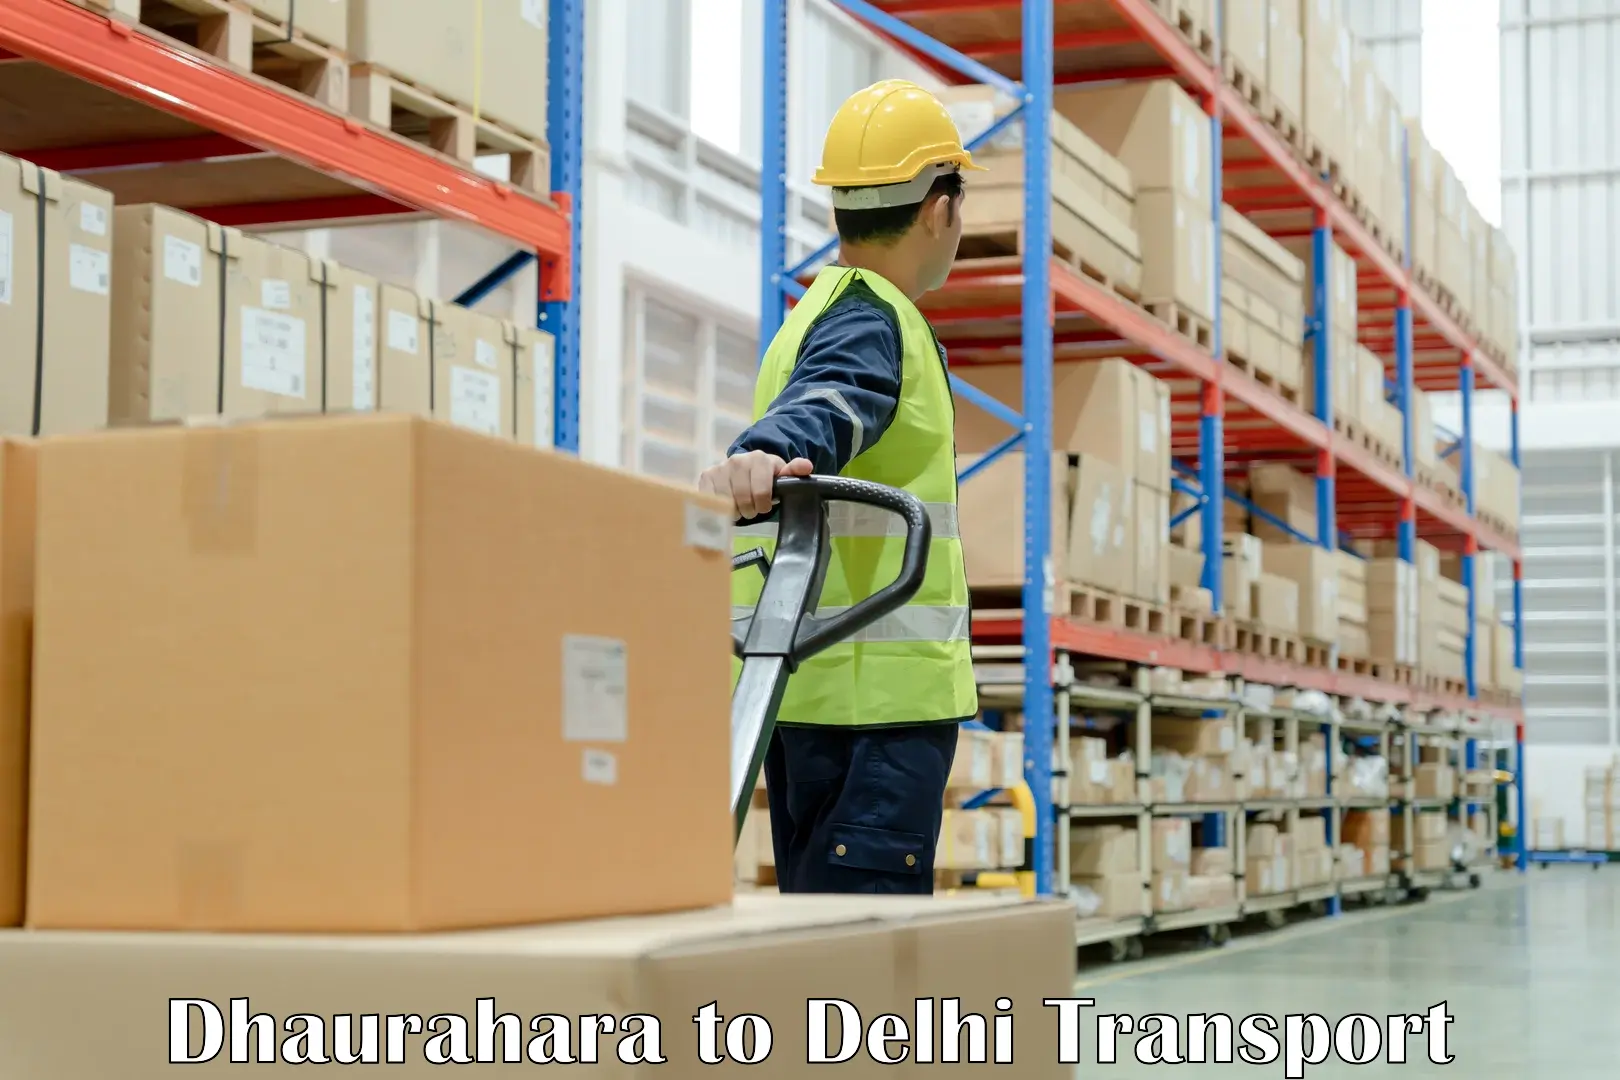 Luggage transport services Dhaurahara to Lodhi Road